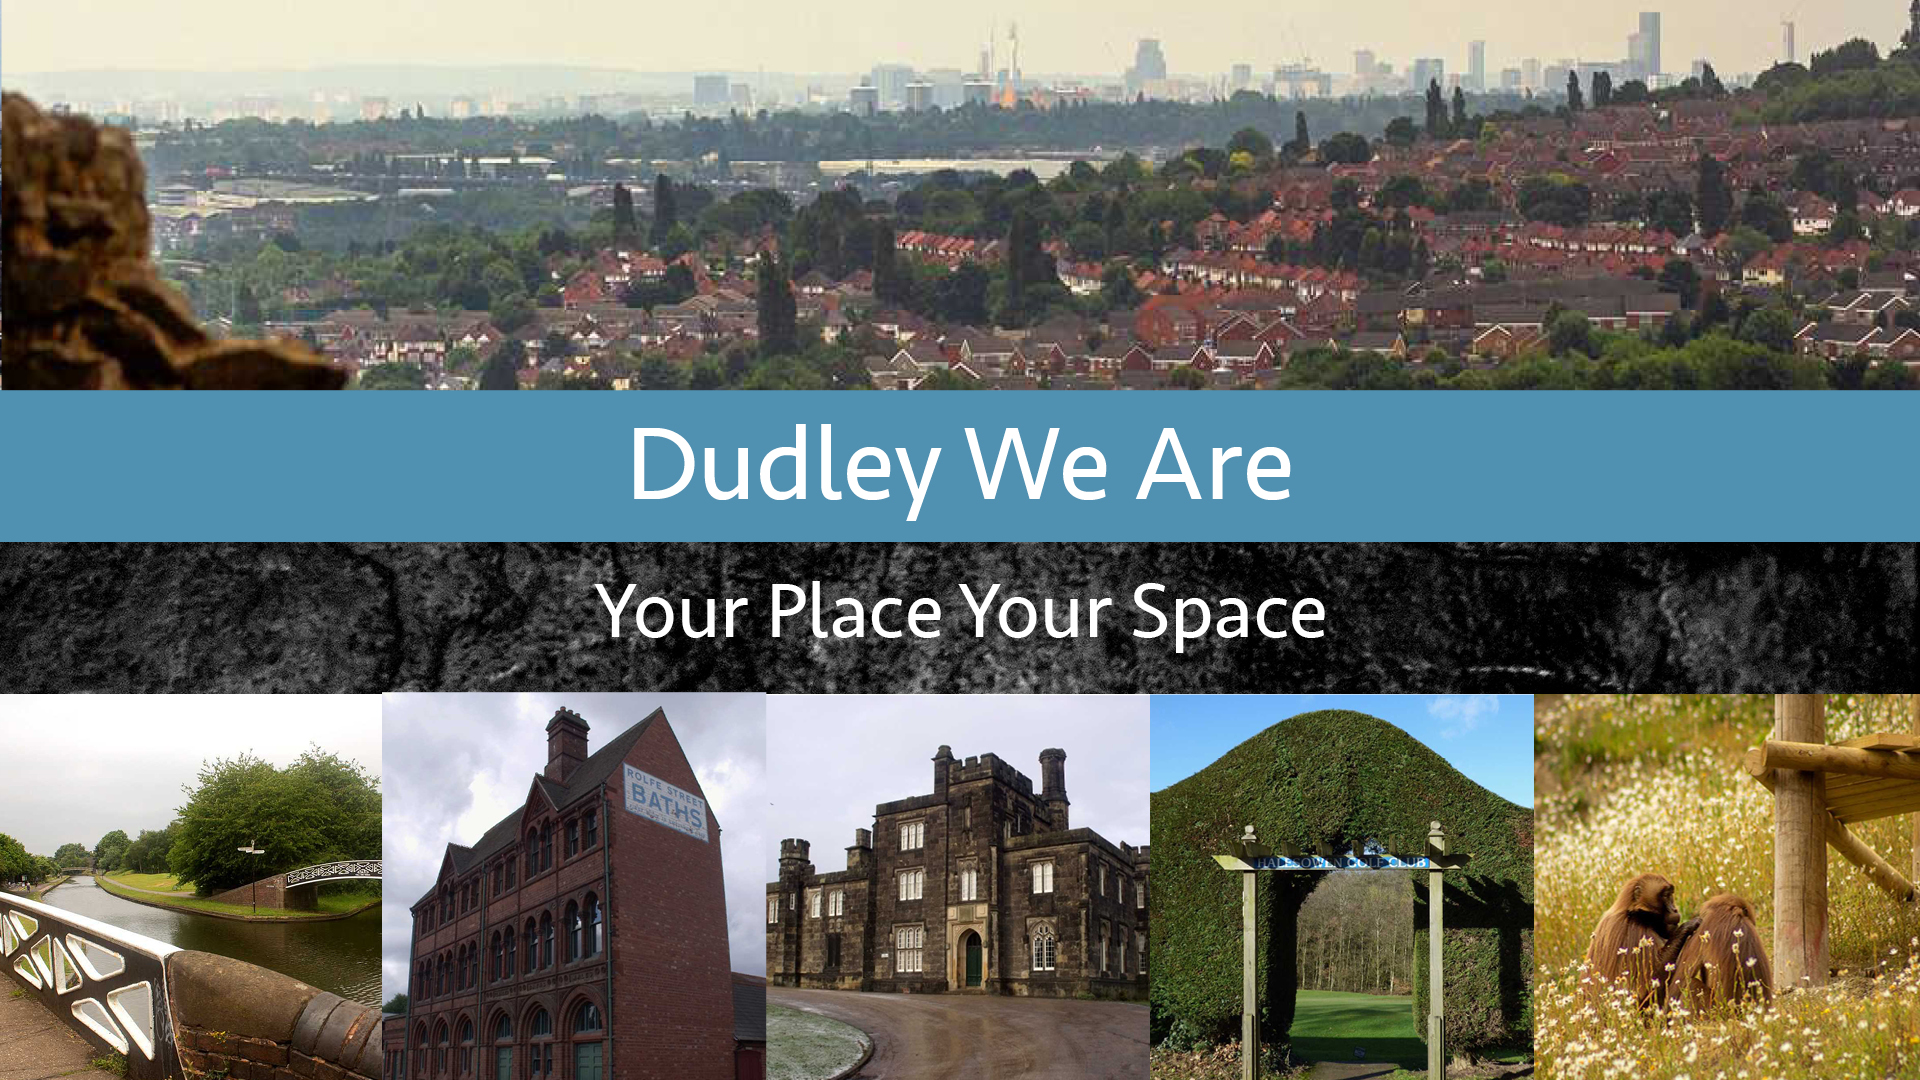 Dudley We Are